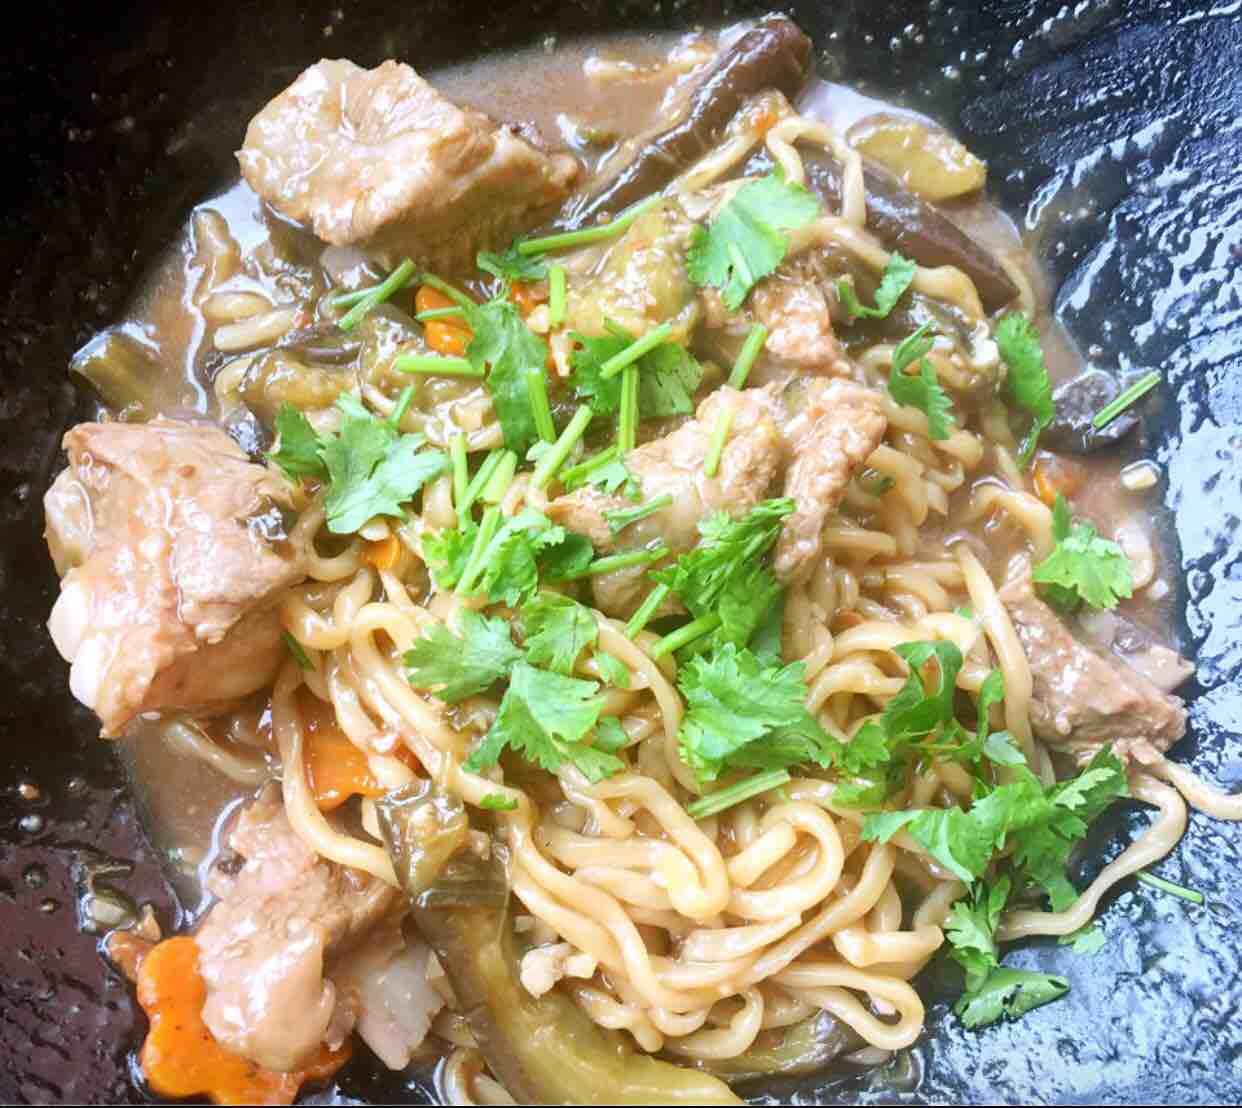 Braised Noodles with Spare Ribs and Eggplant recipe